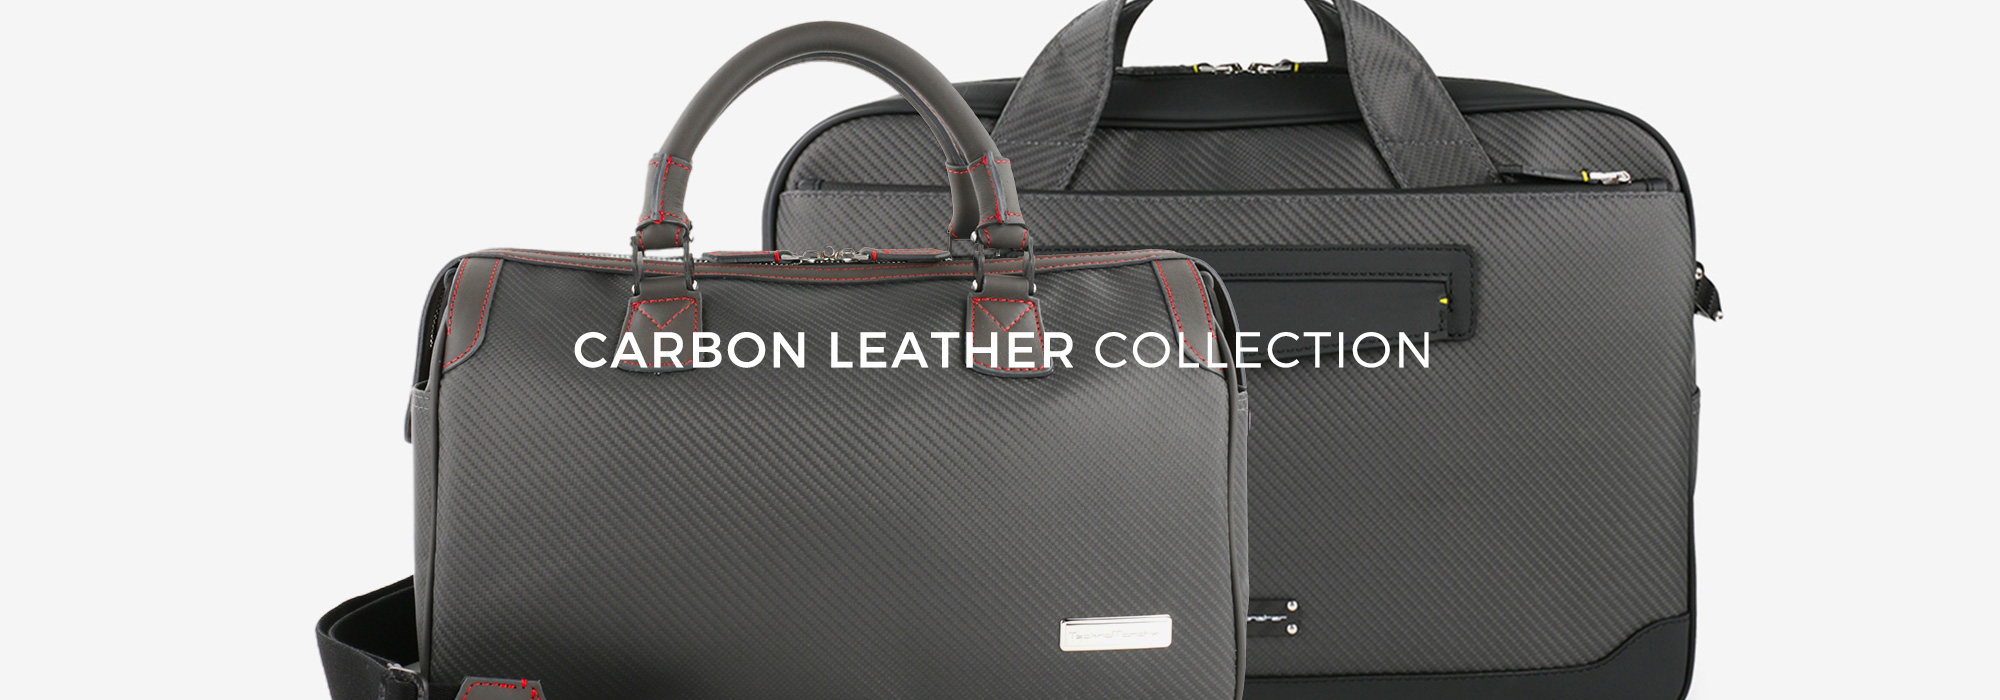 CARBON LEATHER COLLECTION